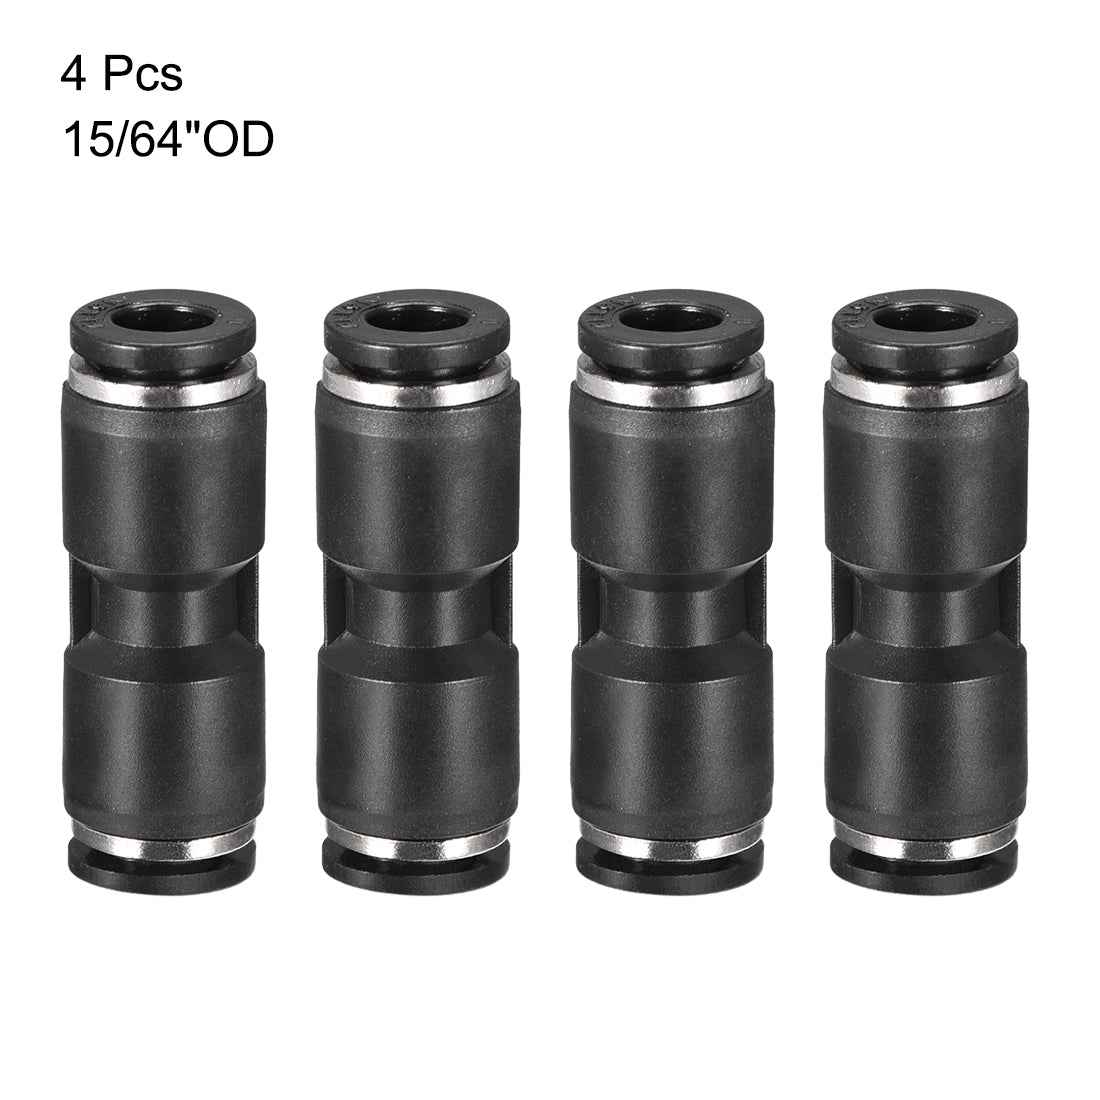 uxcell Uxcell 4pcs Push to Connect Fittings Tube Connect  6mm or 15/64" Straight od Push Fit Fittings Tube Fittings Push Lock